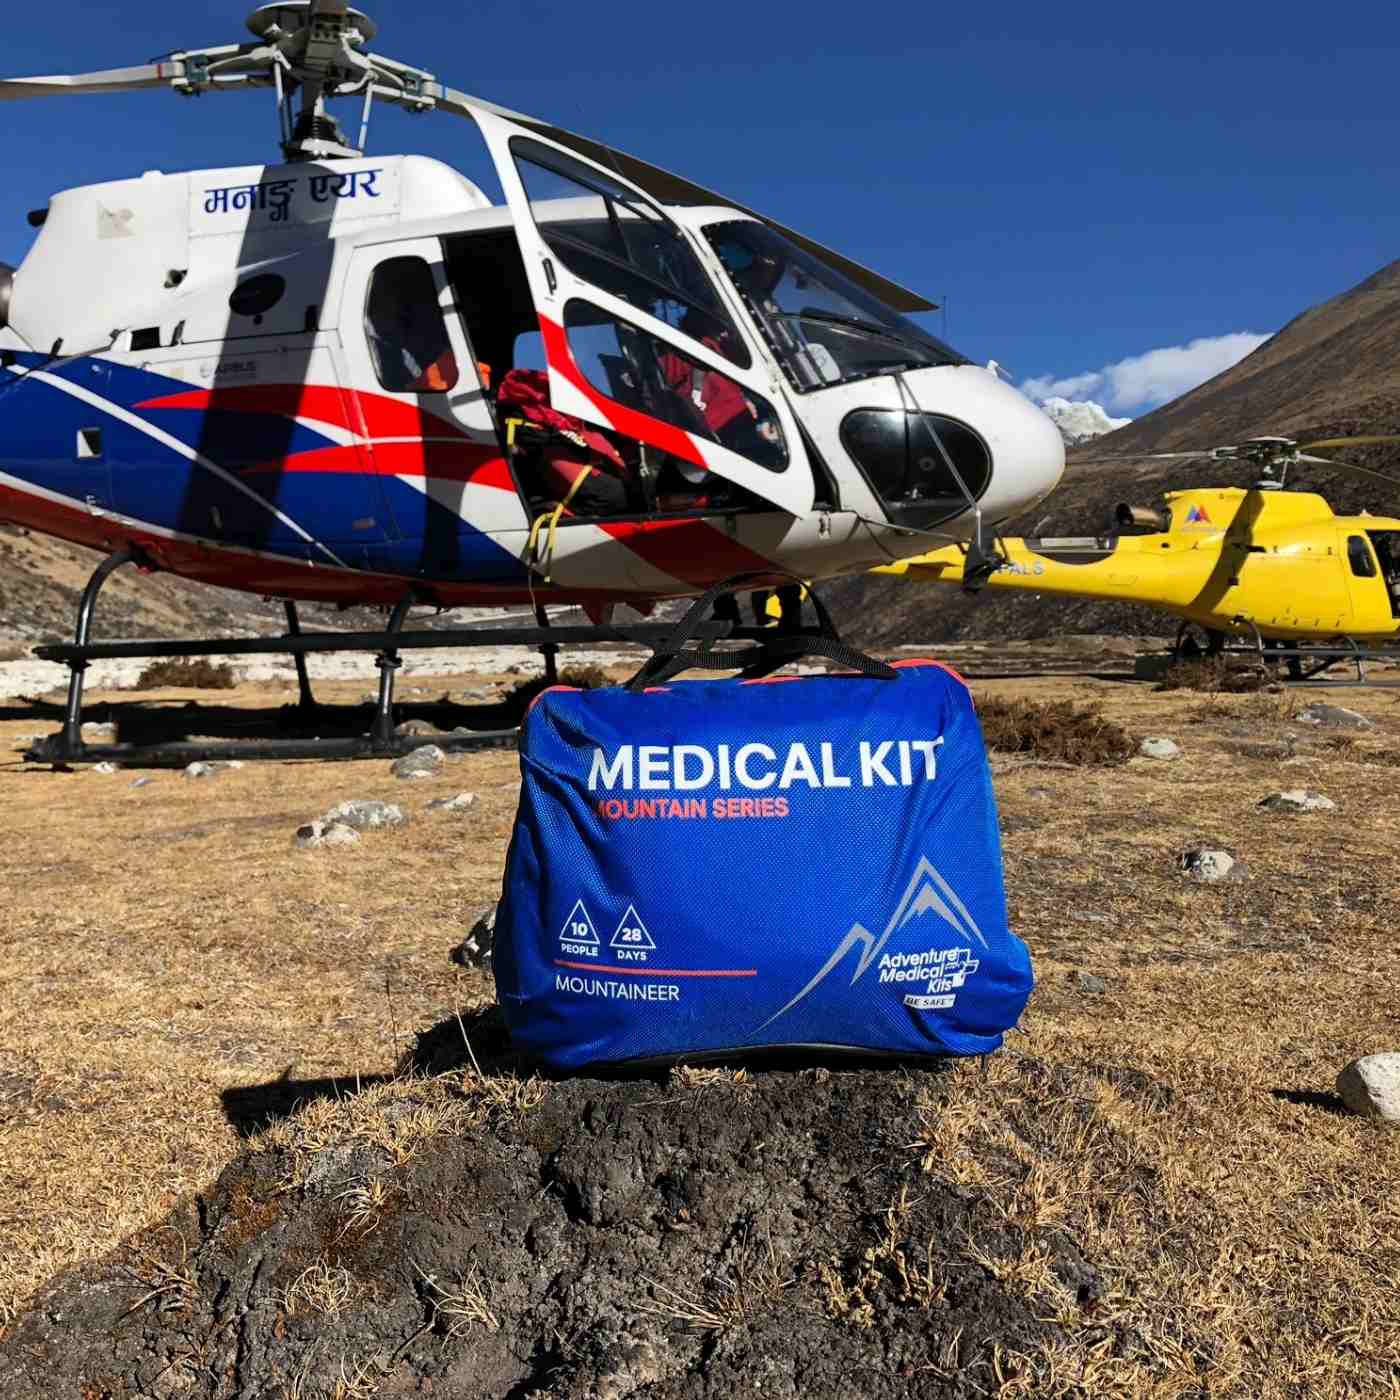 Mountain Series Medical Kit - Mountaineer kit posed in front of helicopter